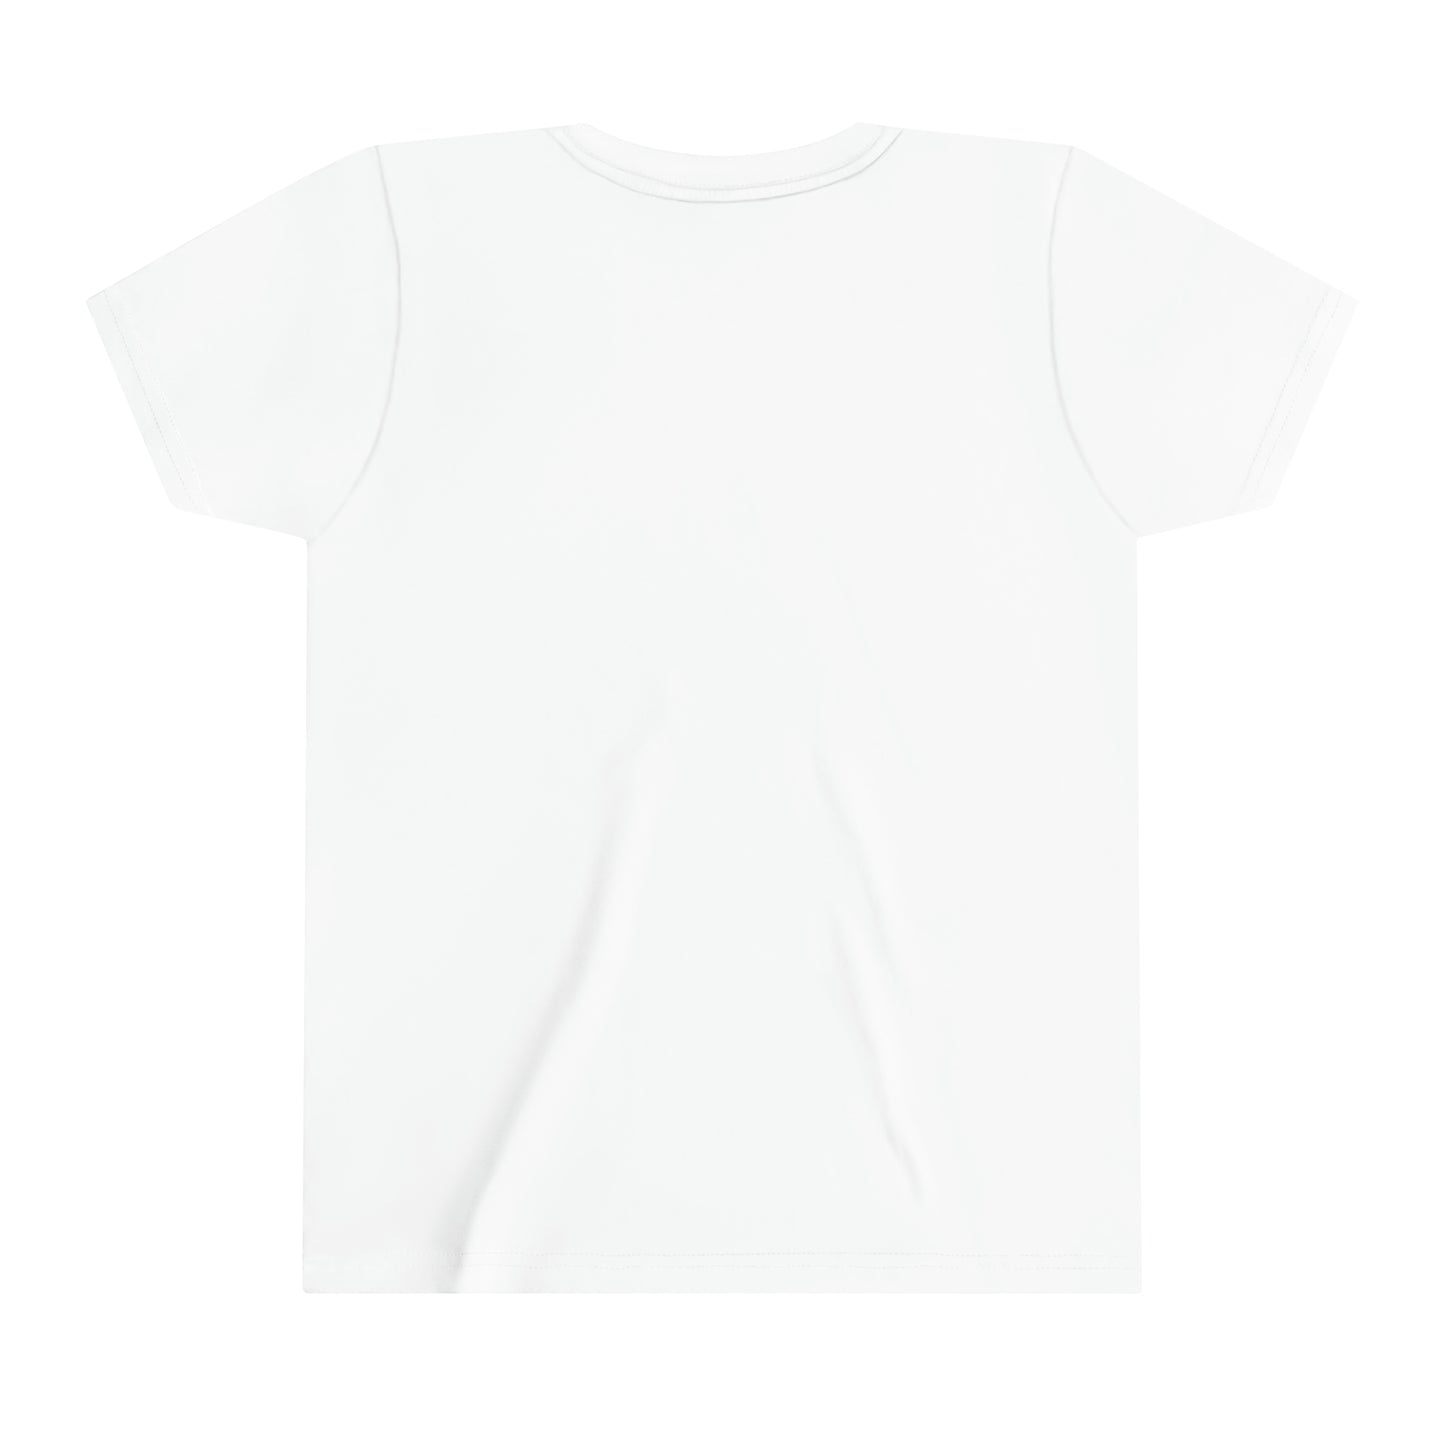 Youth Short Sleeve Tee (11 colors)